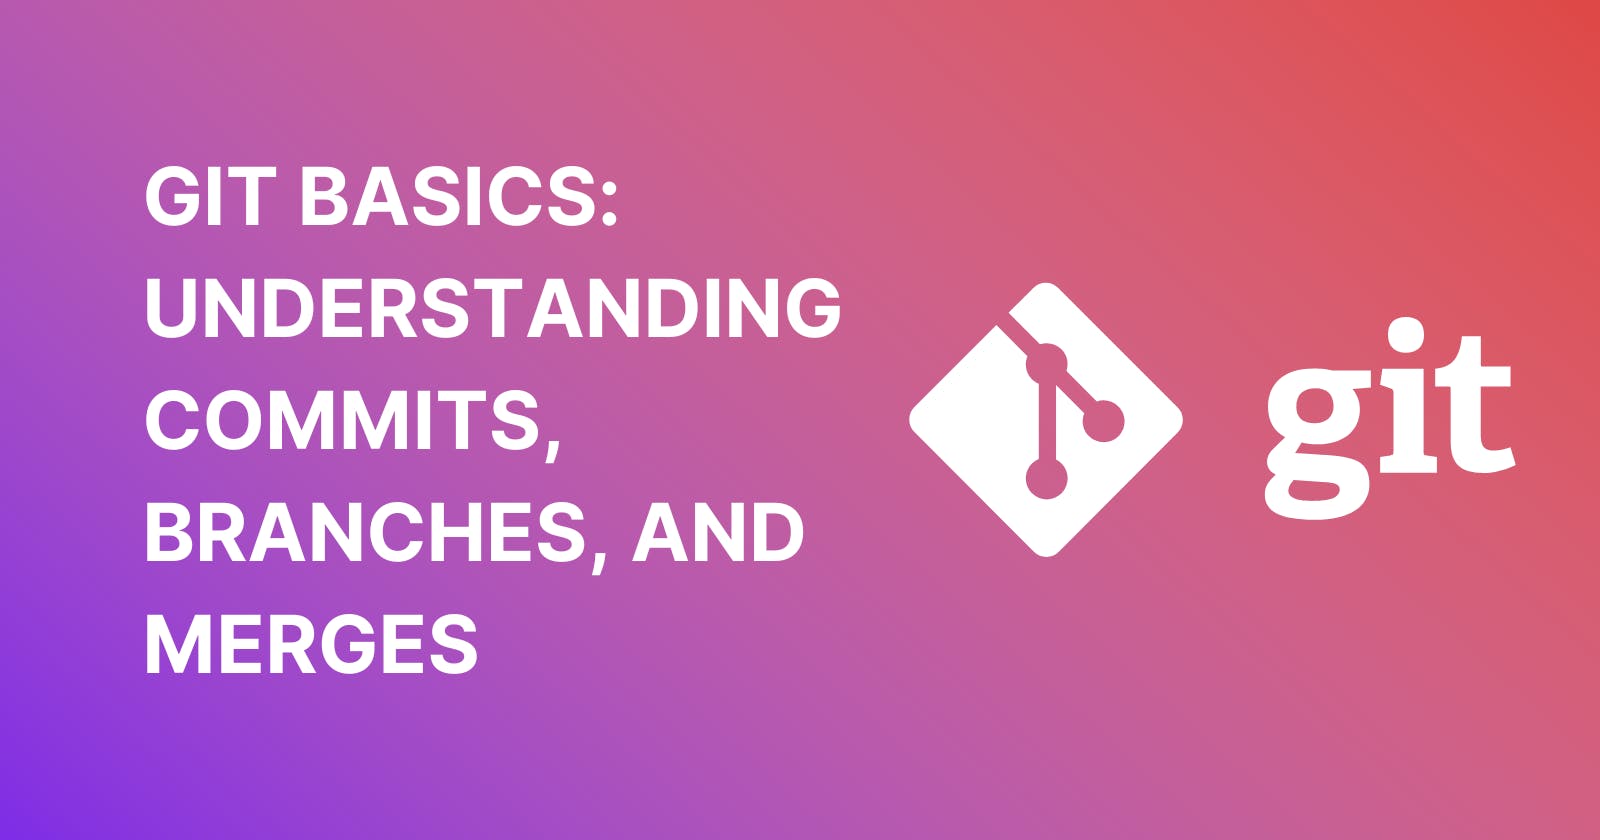 Git basics: Understanding Commits, Branches, and Merges